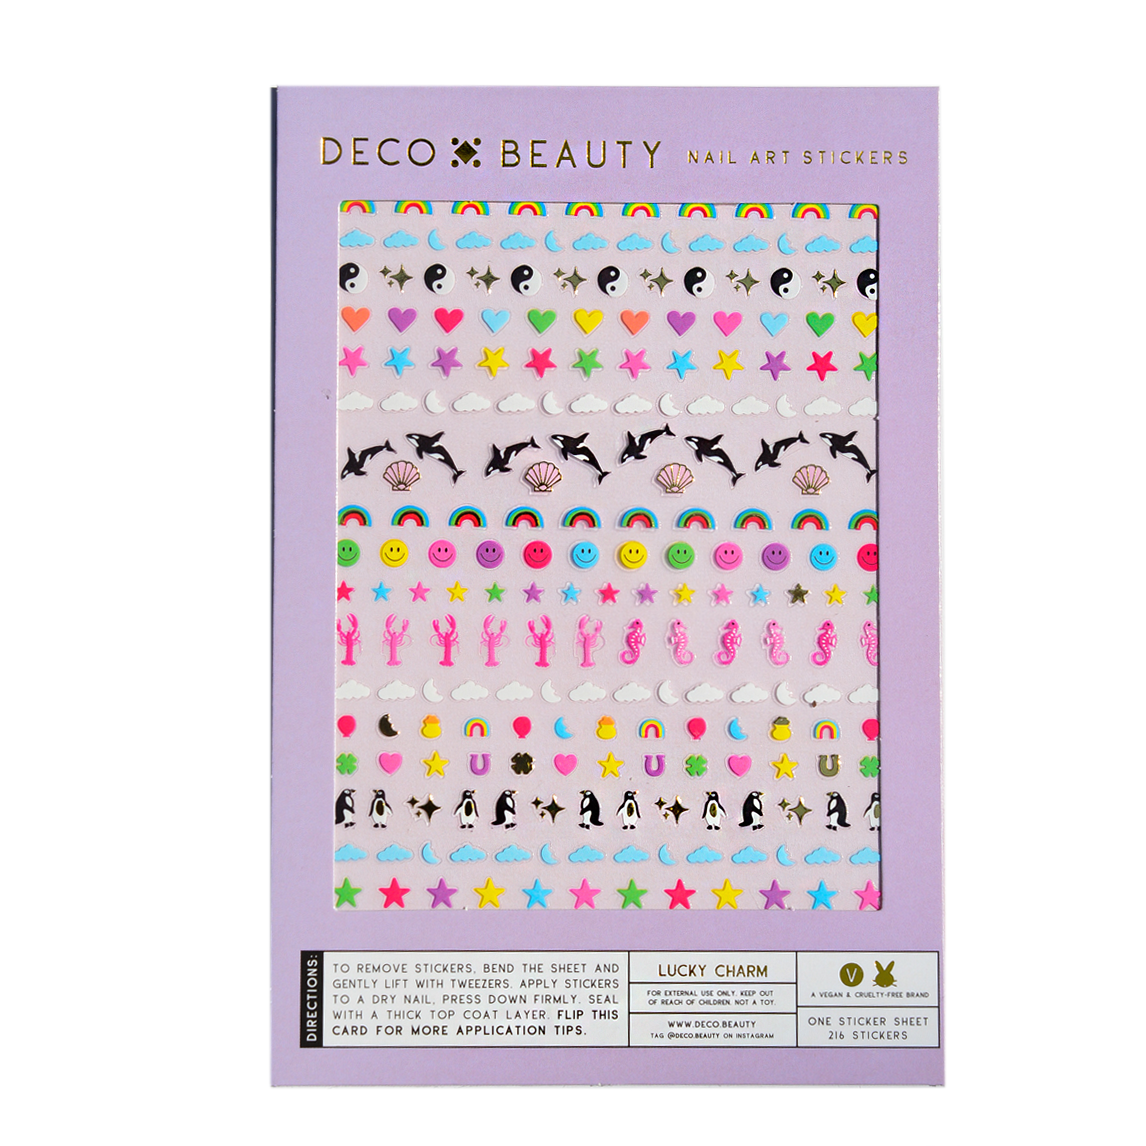 Lucky Charm nail art stickers